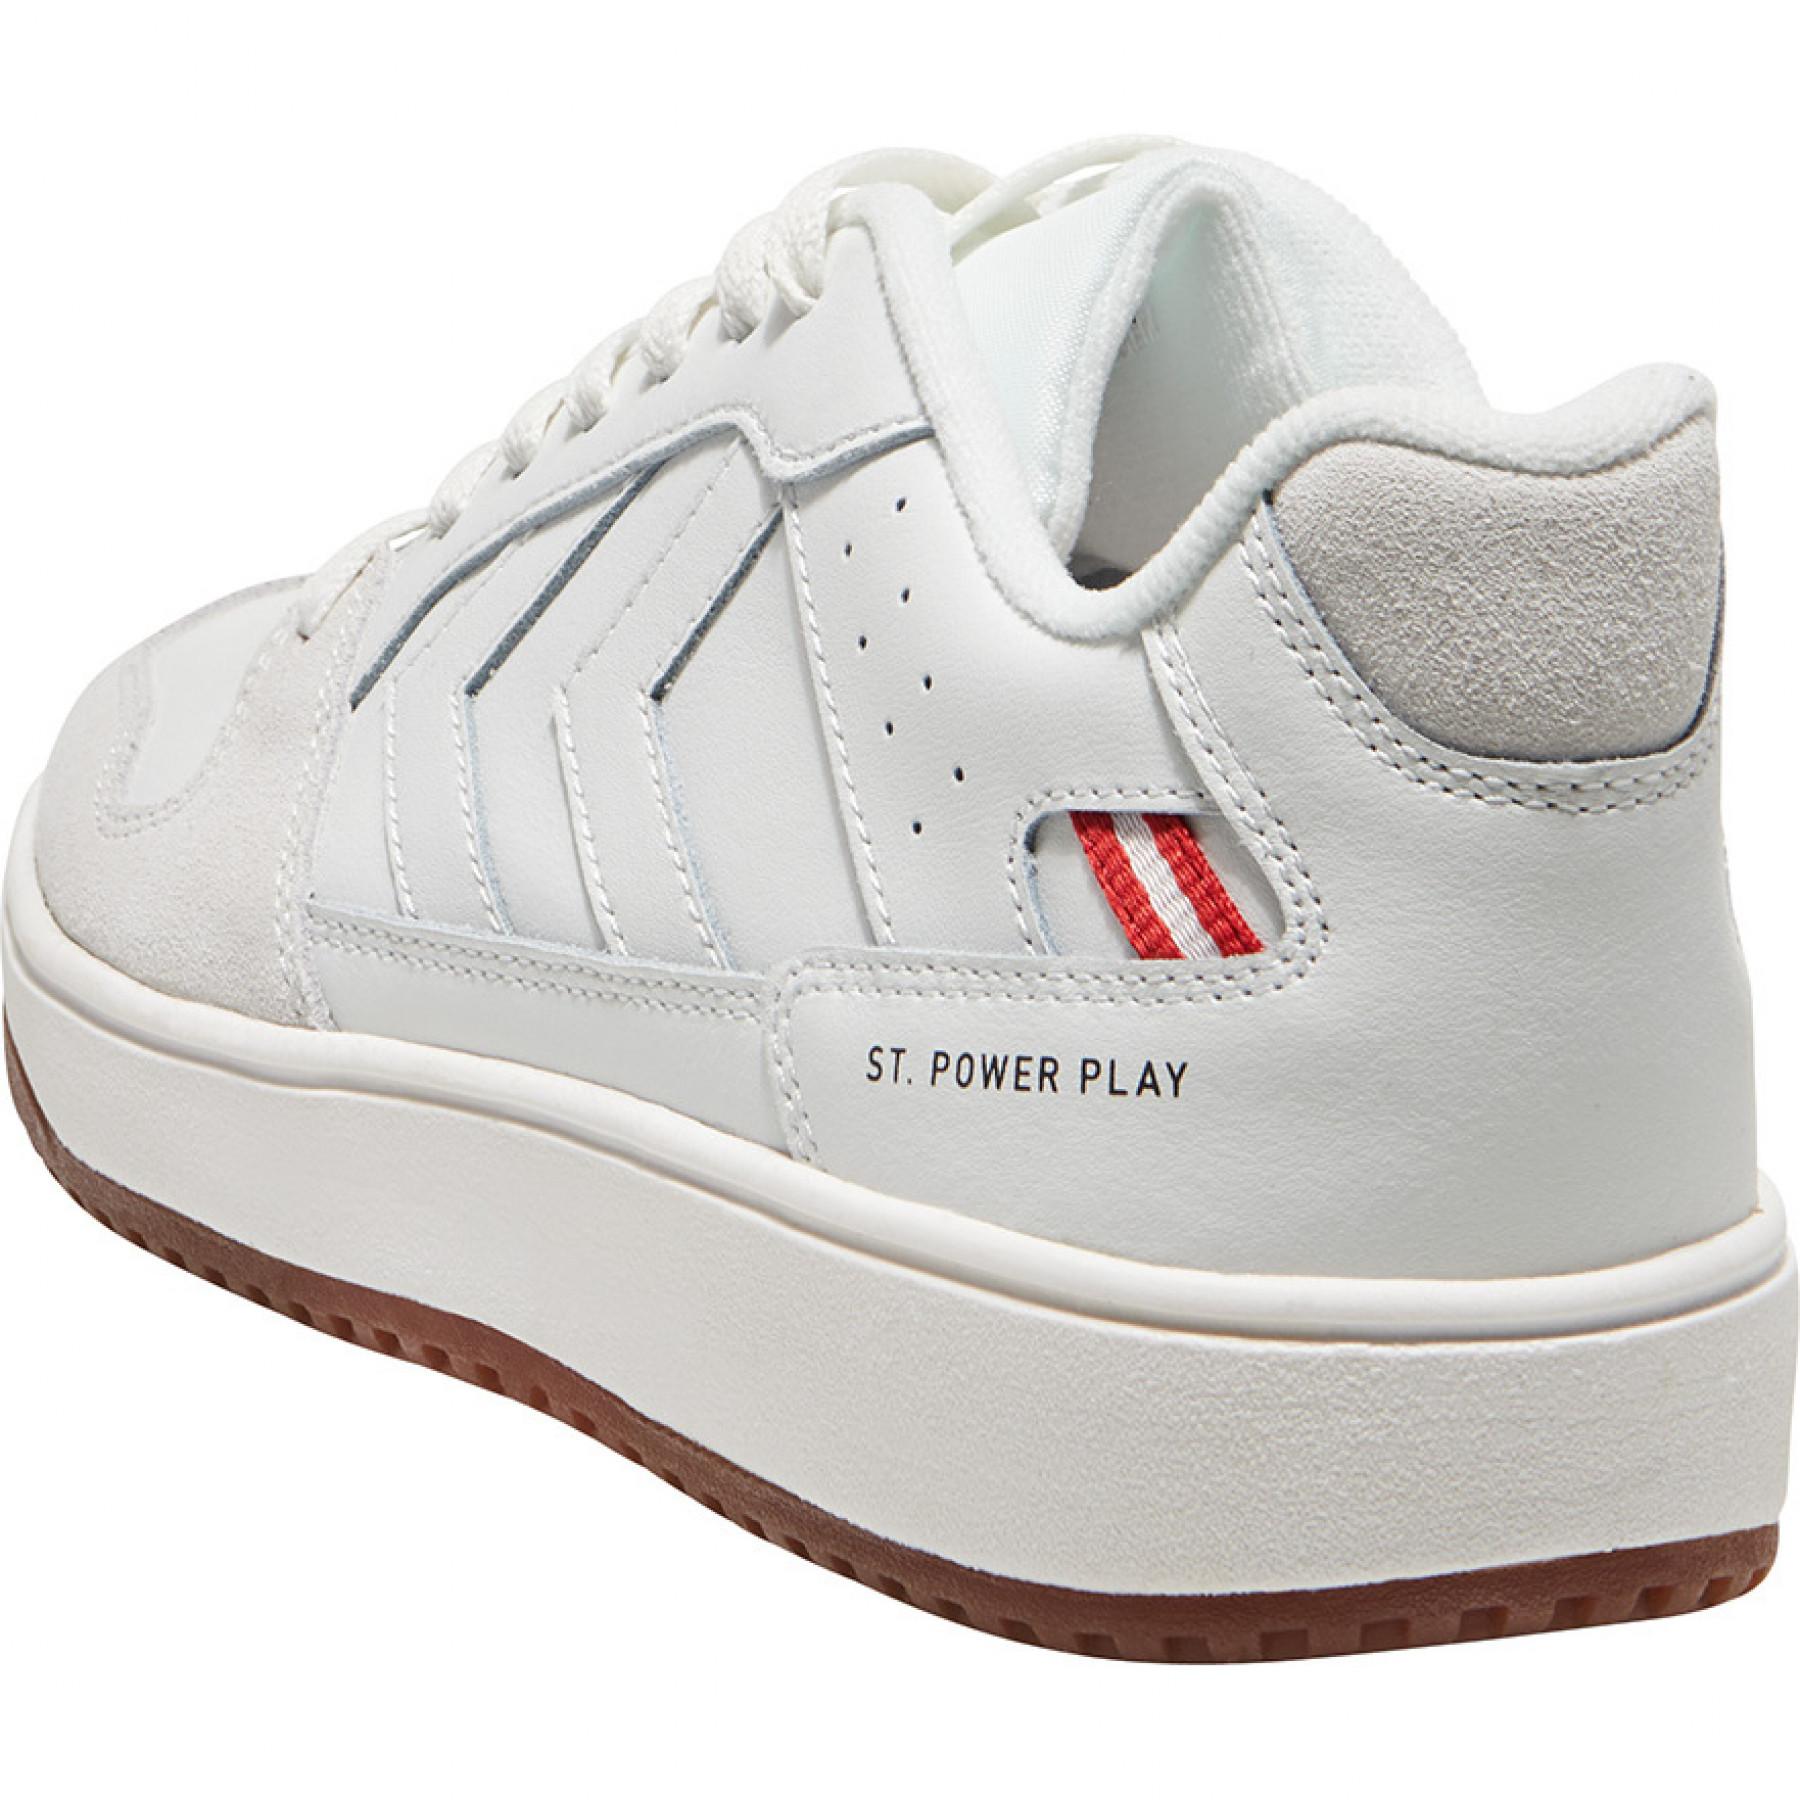 Formadores Hummel st. power play